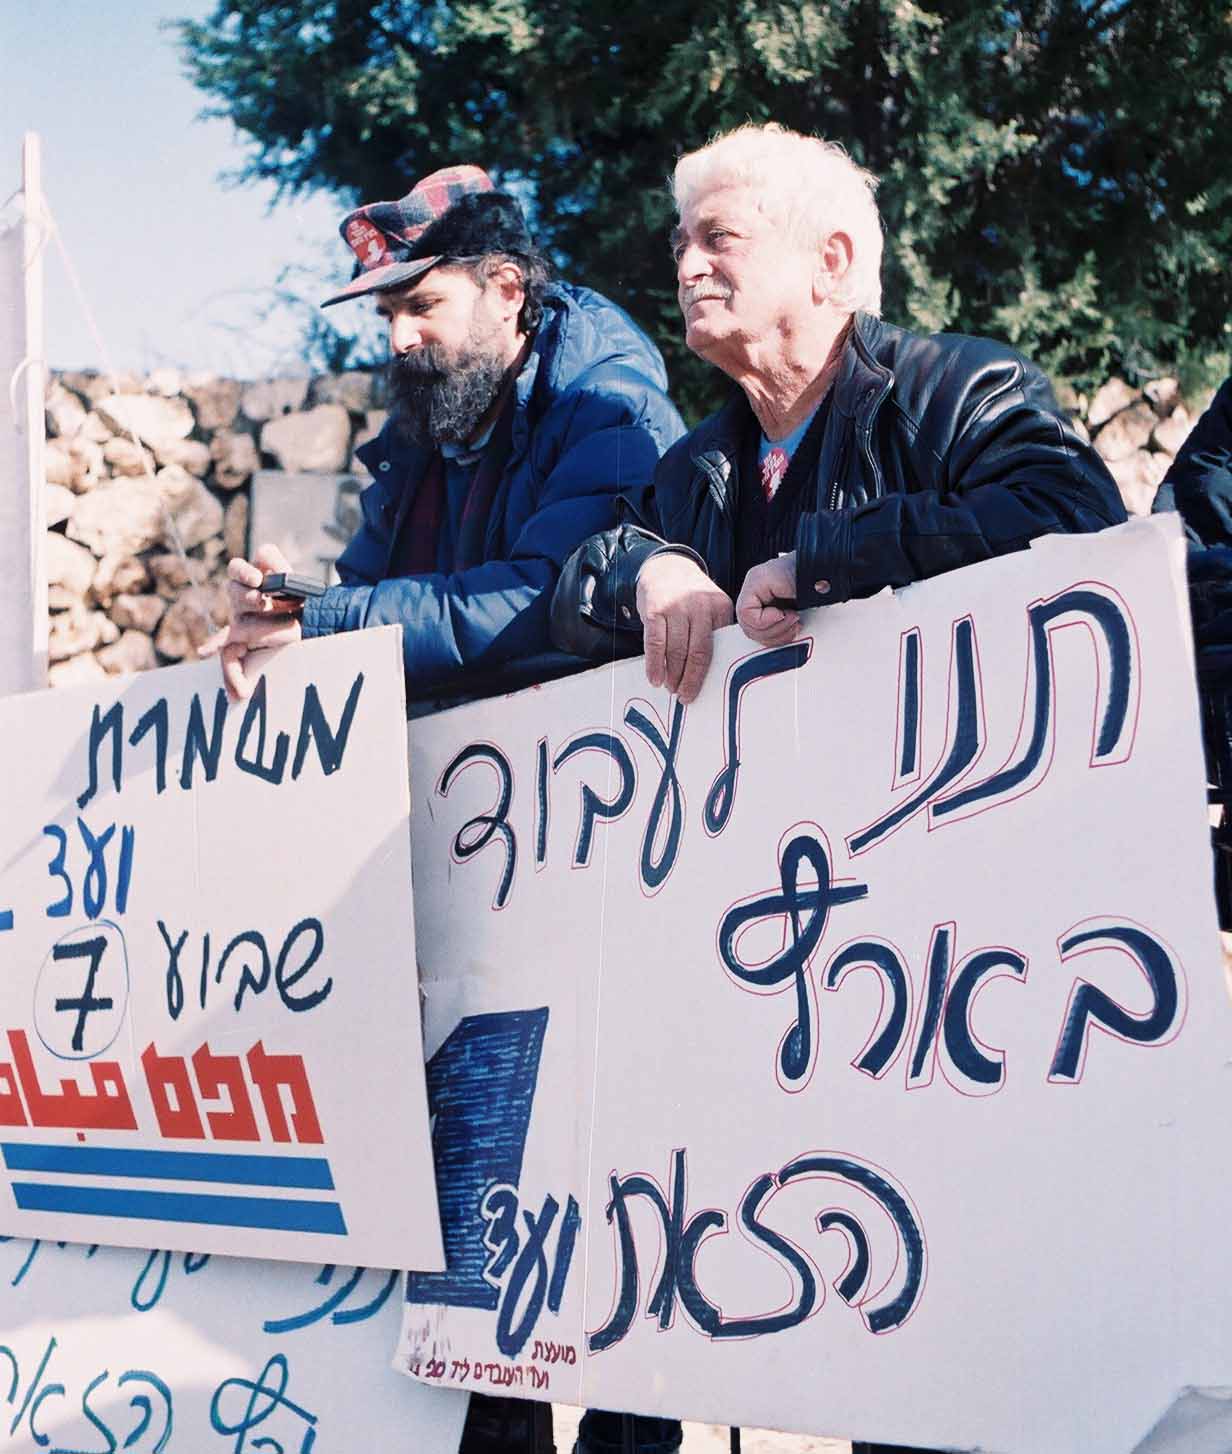 Pini Grove (right) at a protest. Tzarfati: &quot;It is better to be hated for being strong and taking care of people&quot; (Photo: Ran Melamed / Wikipedia)